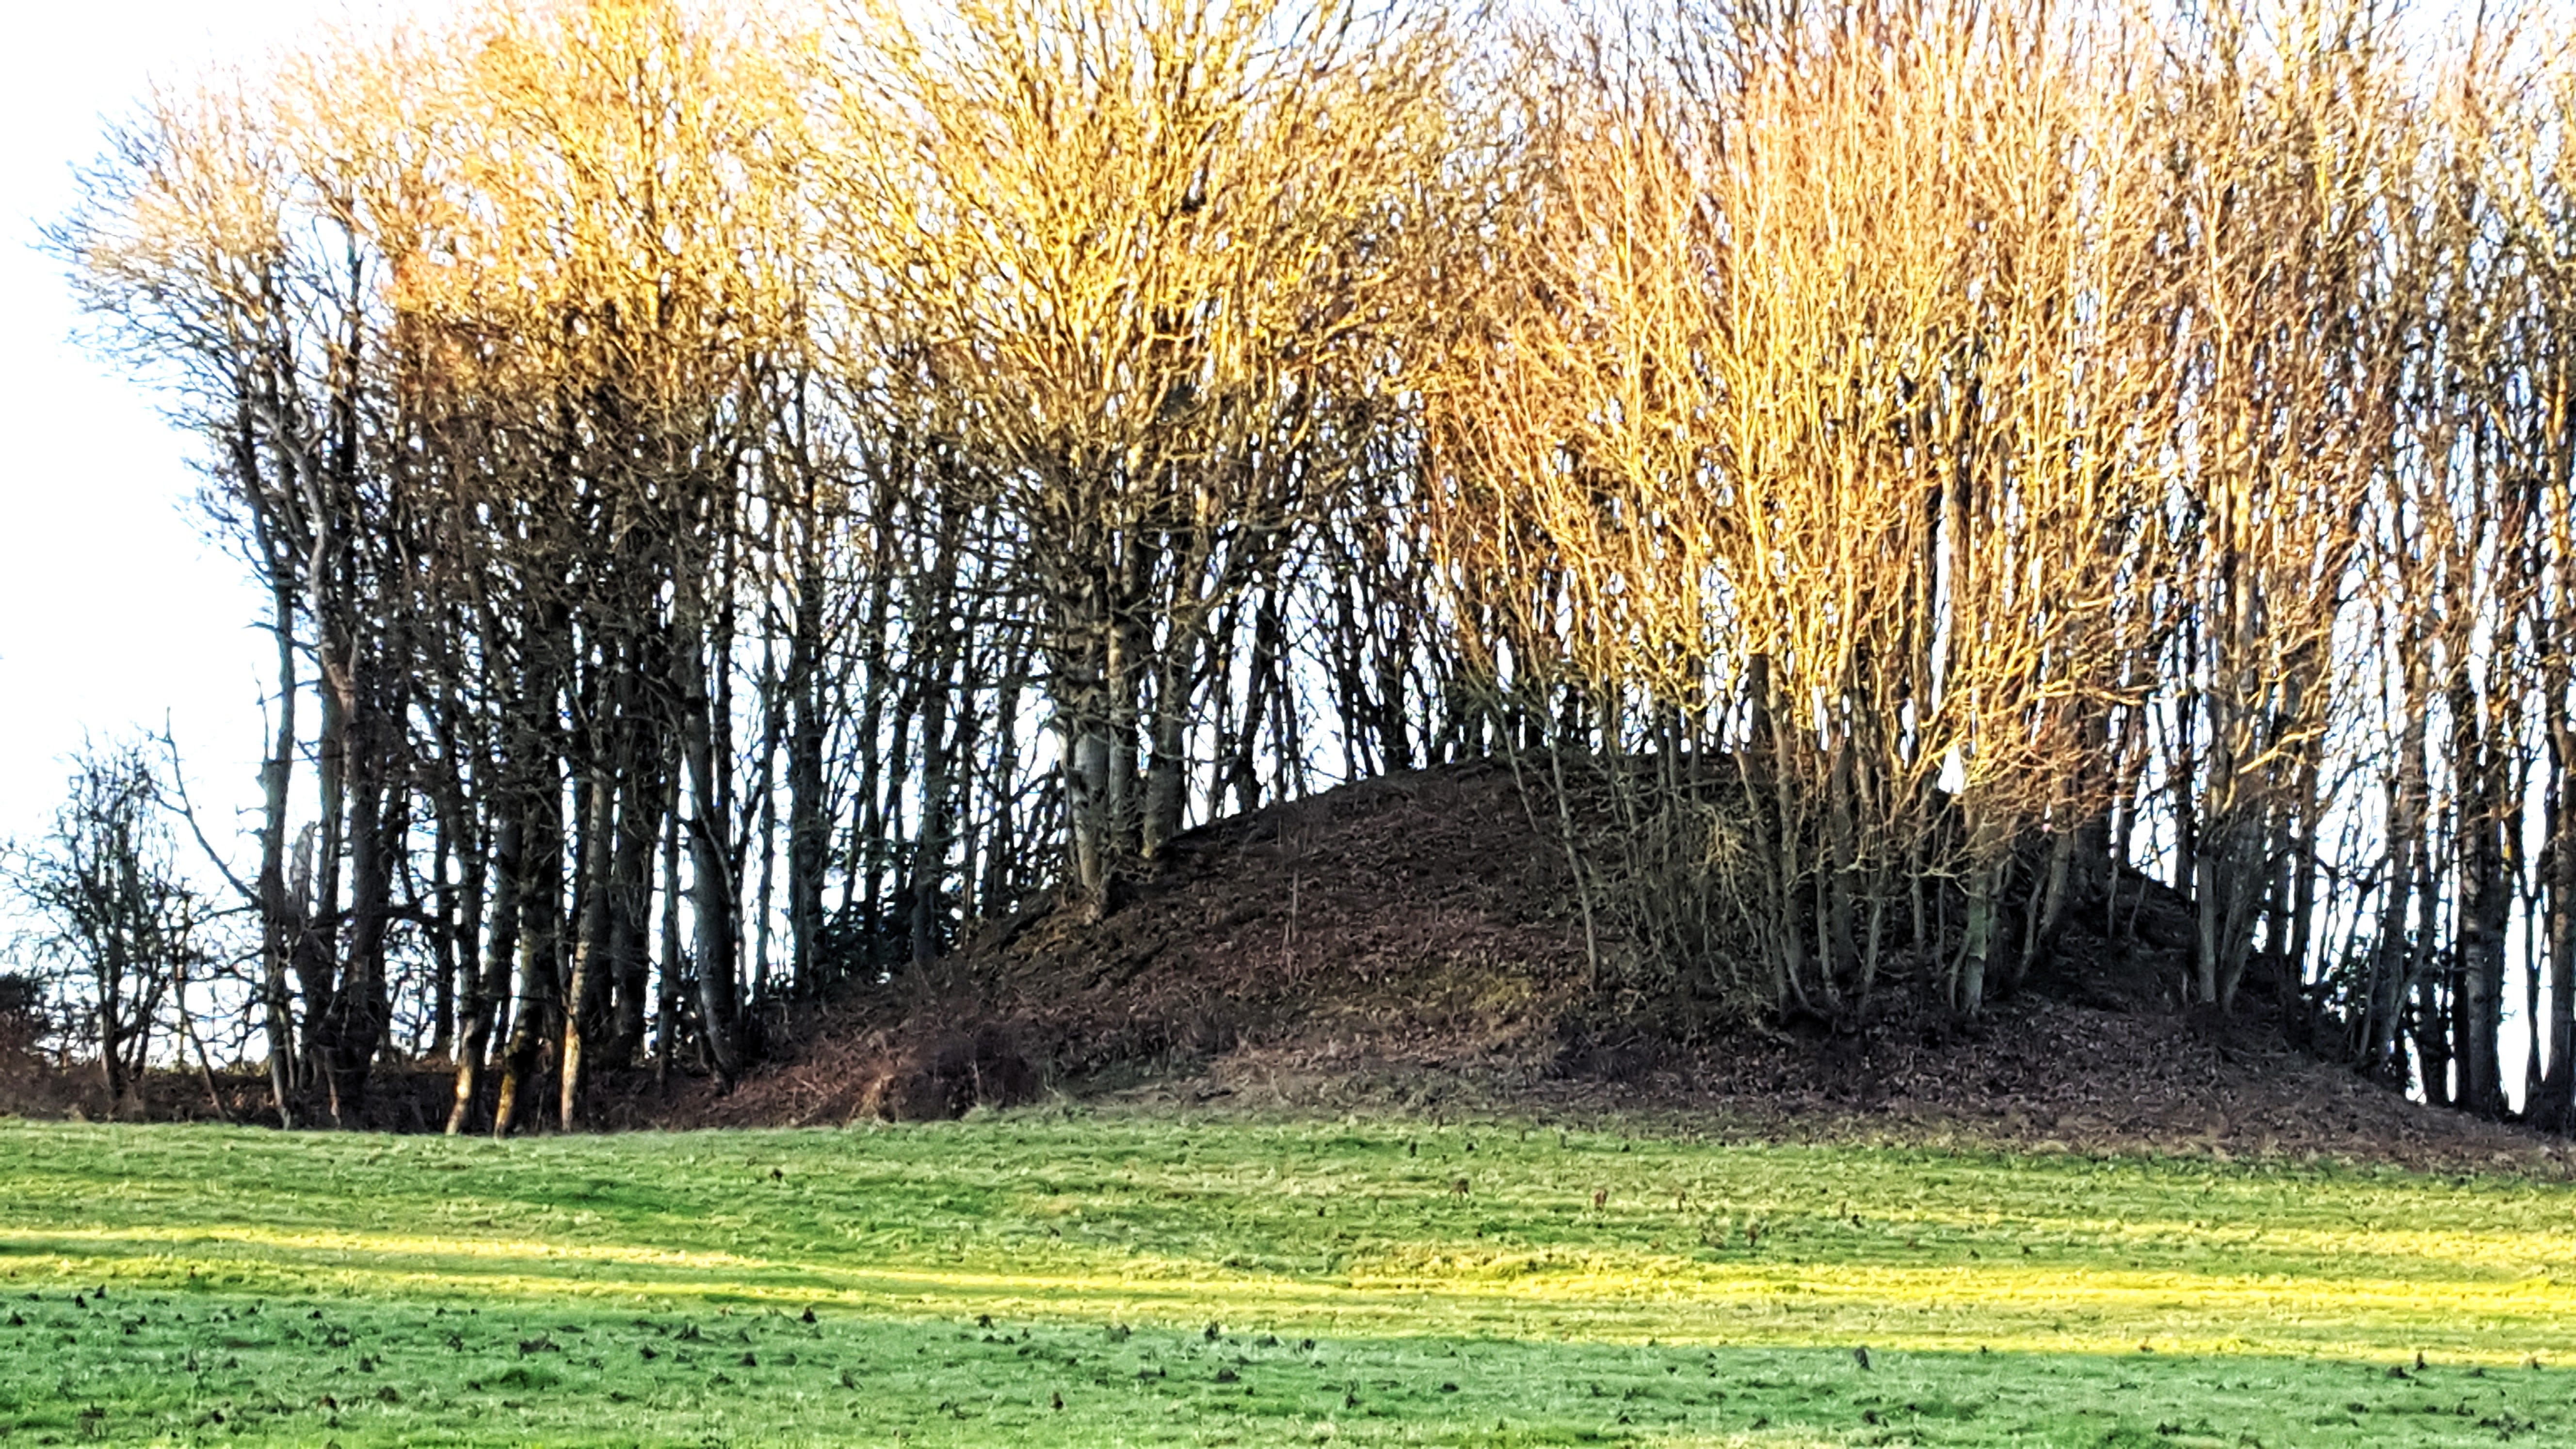 The huge raised dome of Rath Airthir, a burial mound at Telltown beside St Patrick's Church. It is now covered with trees, its three ditches hidden. The sun is slanting across the mound lighting up the bare branches of the trees in golden light.